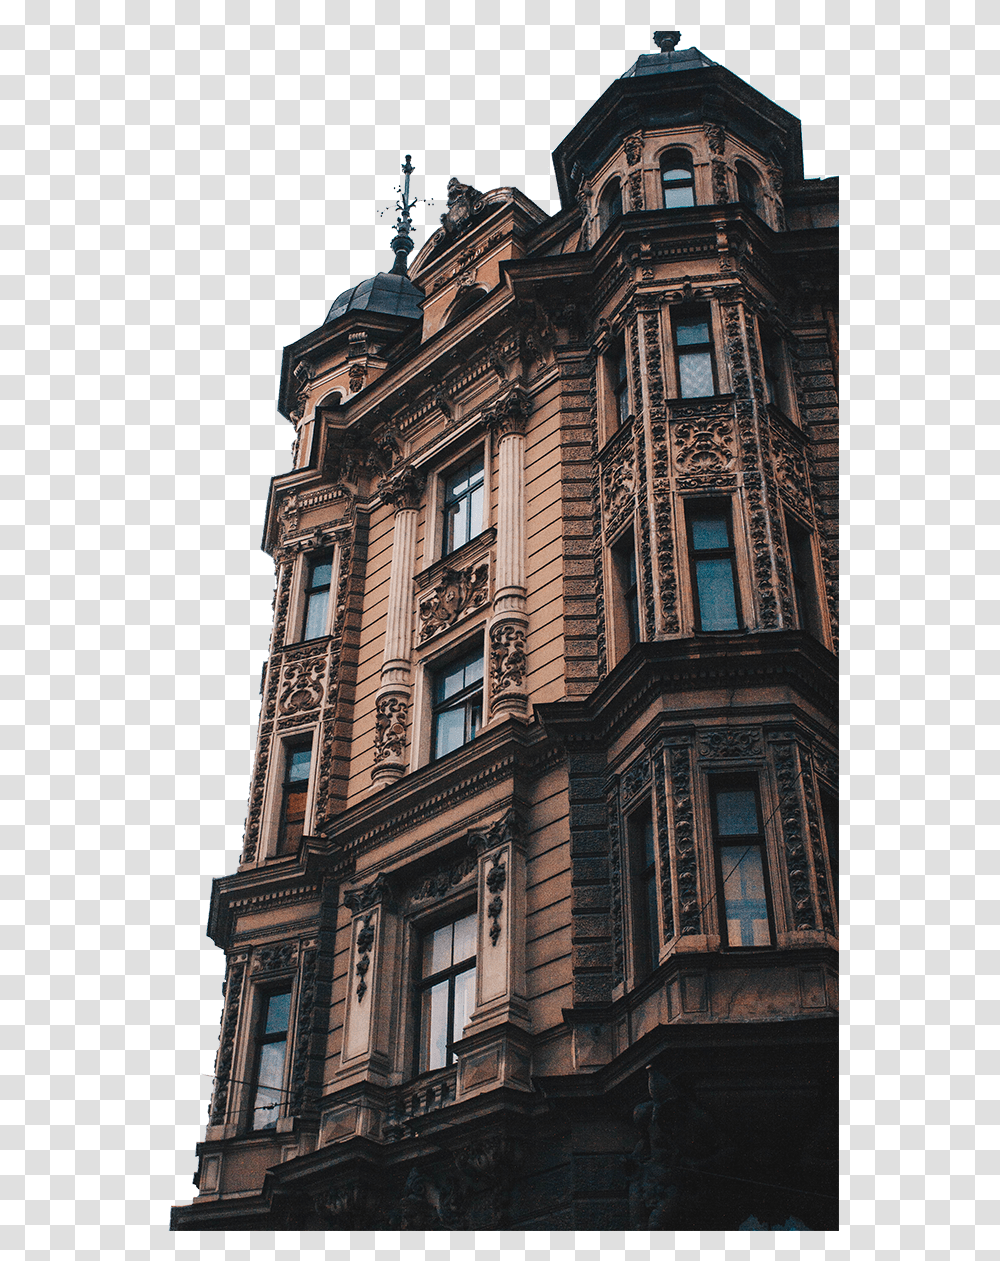 Image About House In By Baka Edificios Aesthetic, Corner, High Rise, City, Urban Transparent Png